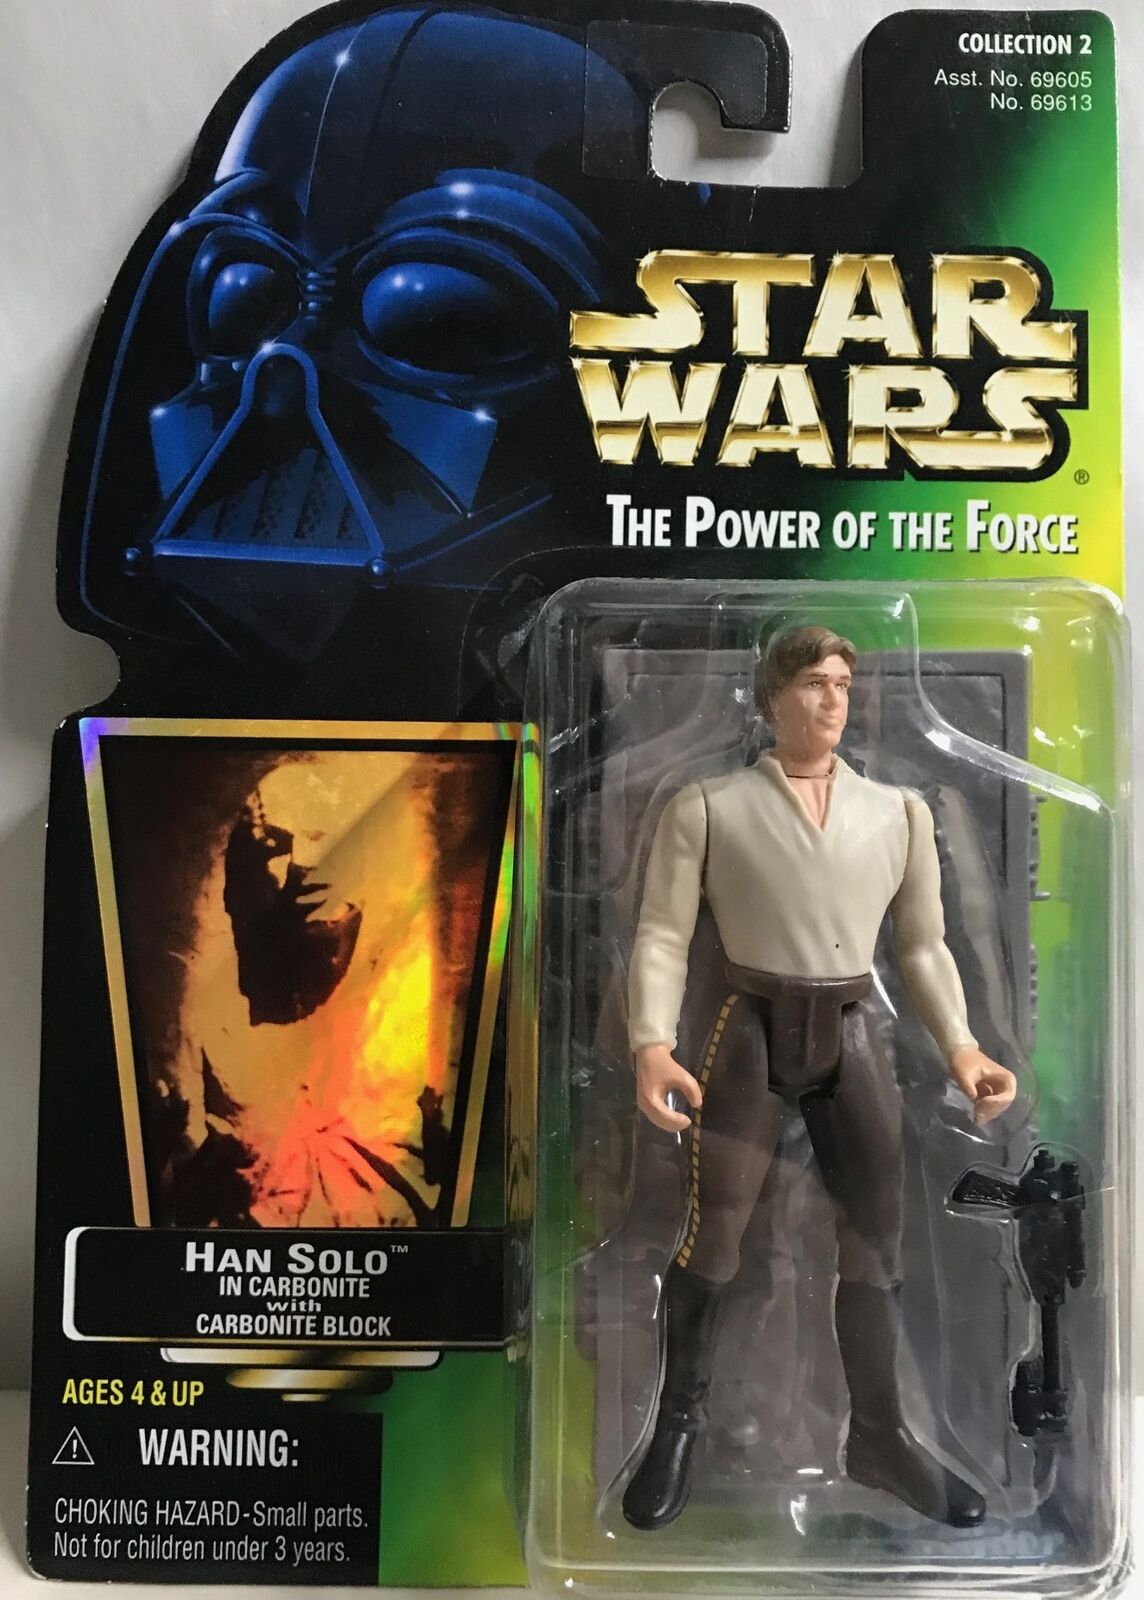 STAR WARS - KENNER - POTF - HAN SOLO - "IN CARBONITE" - with Carbonite Block